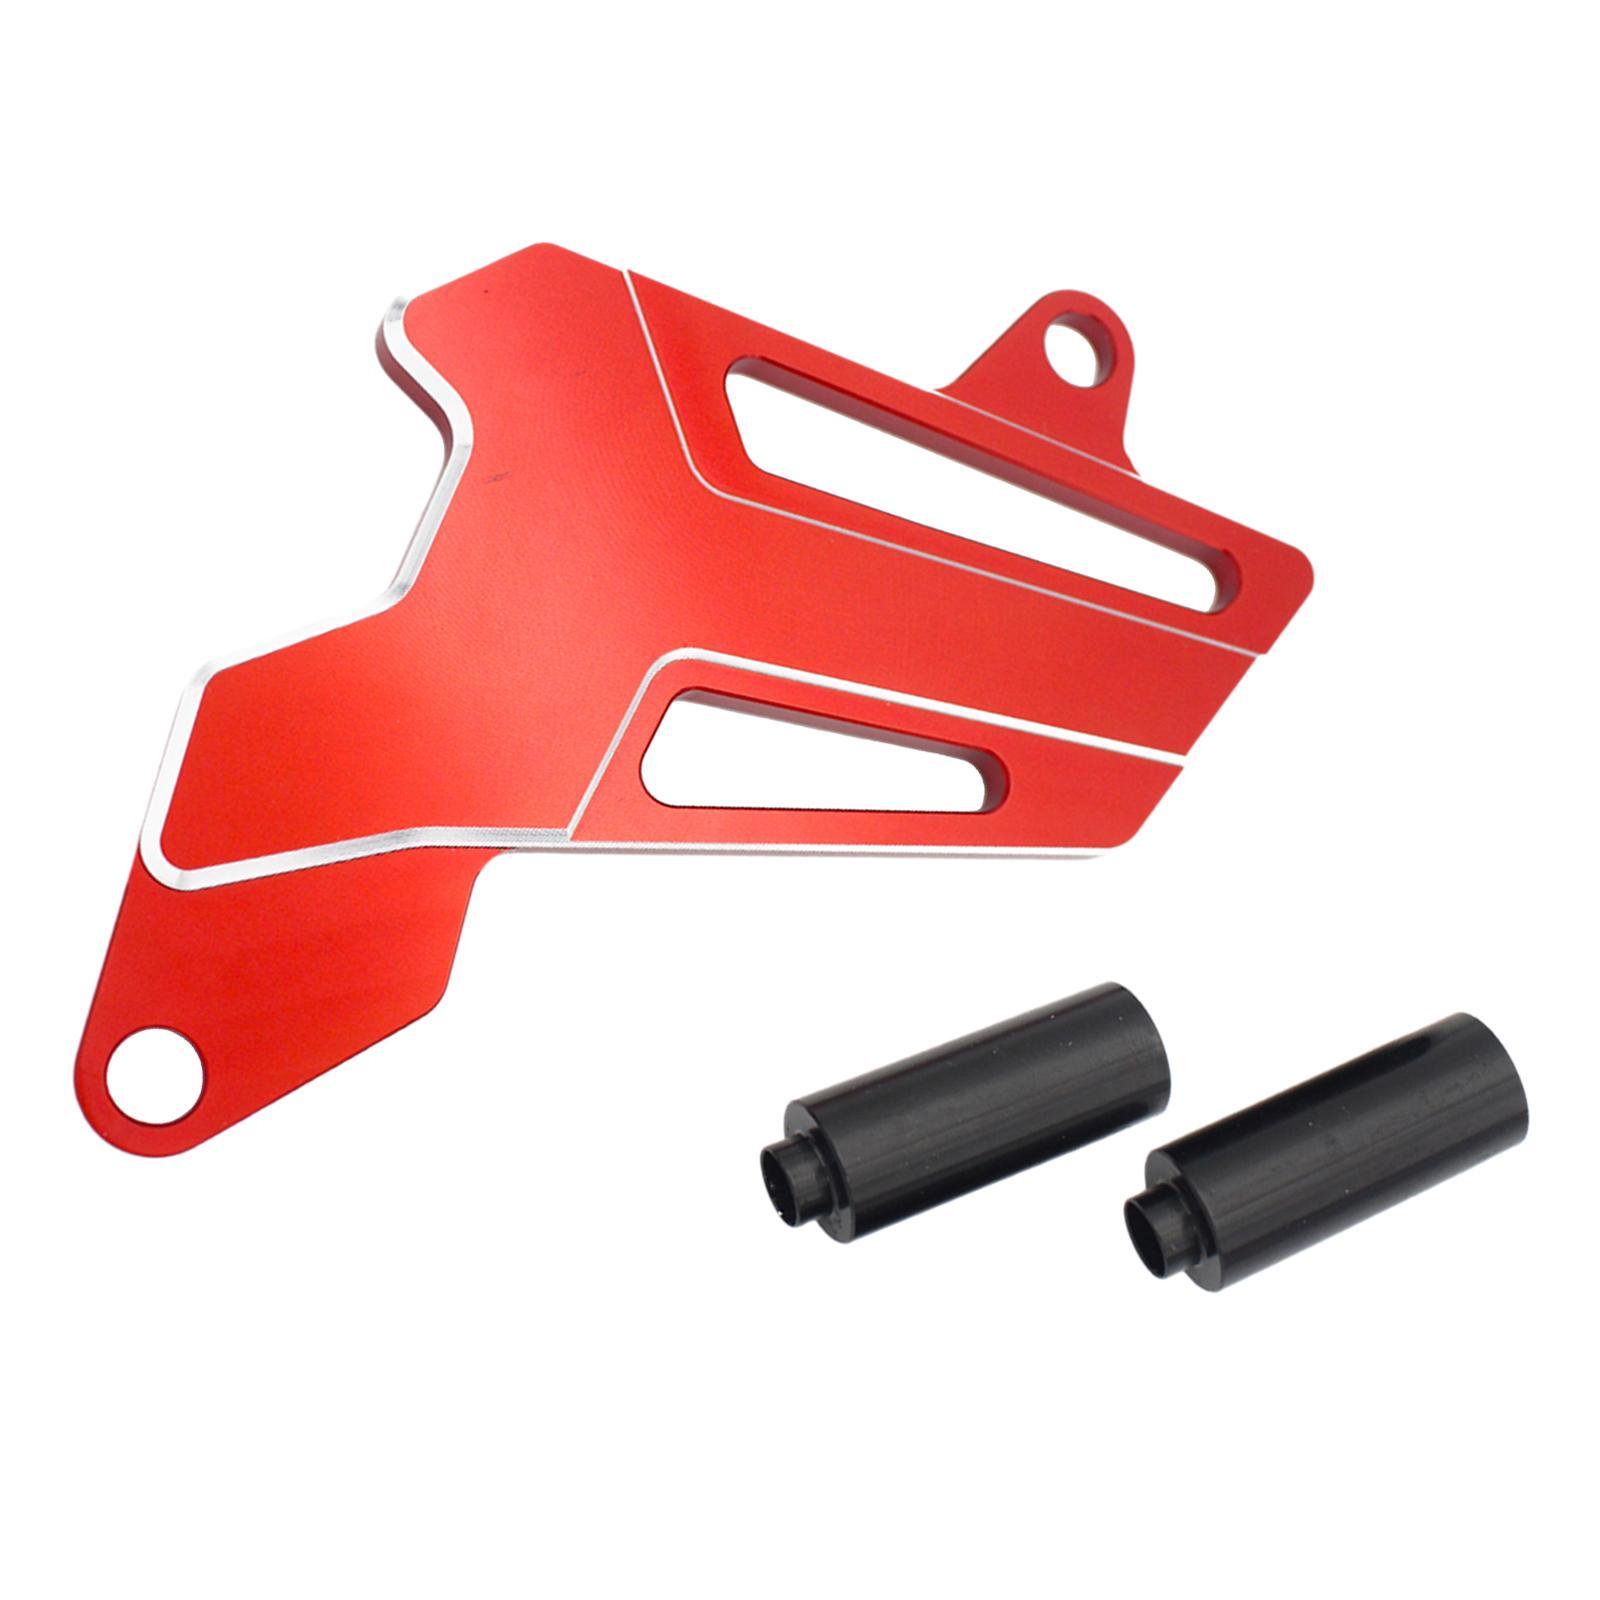 Aluminum Alloy Front Sprocket Cover for Crf250L Crf250M Crf250 Durable